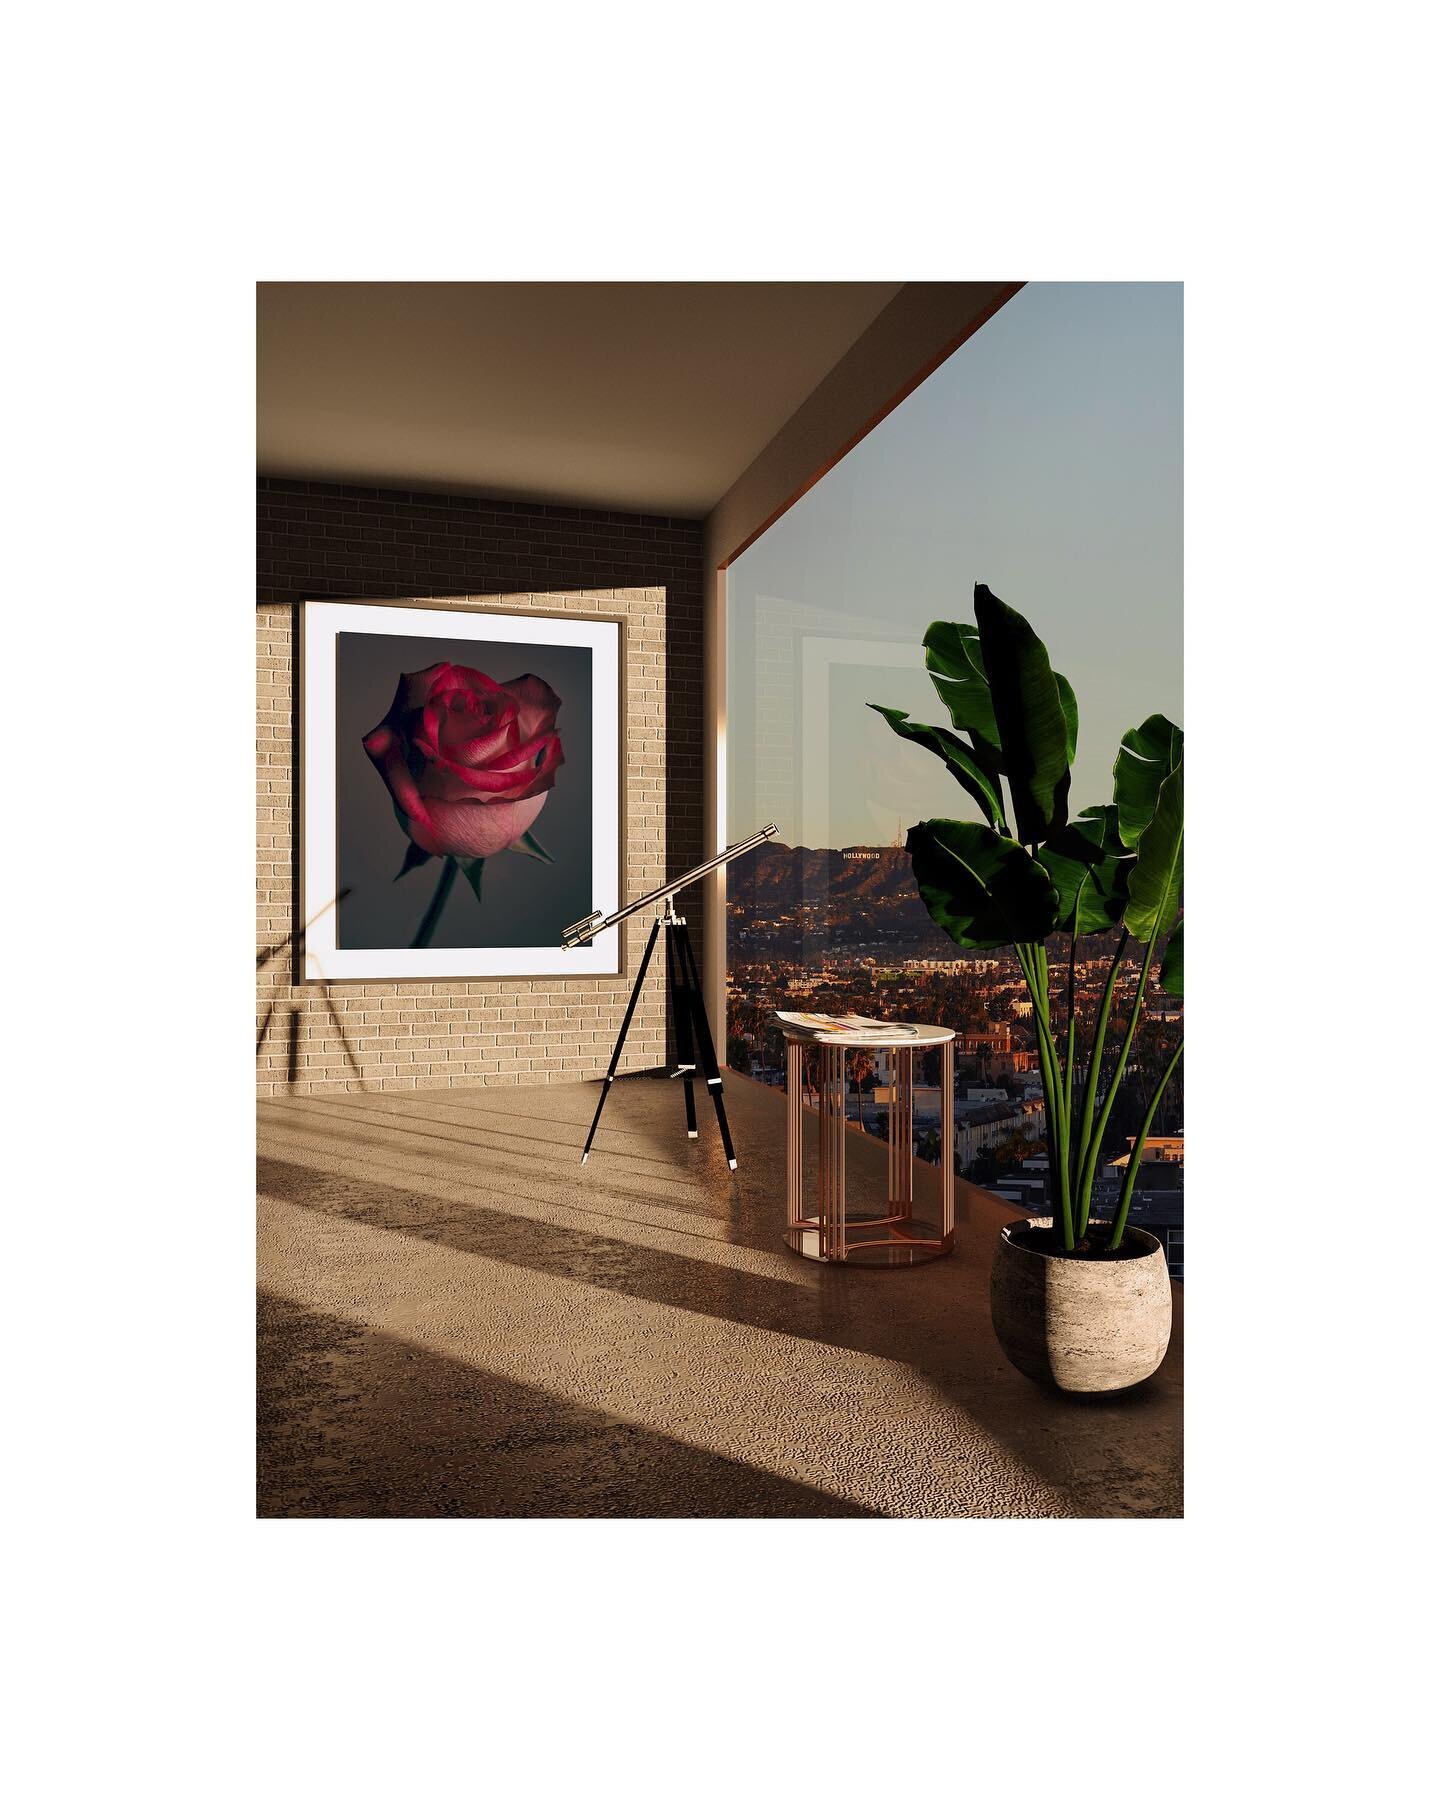 Sanguine, 2019
&mdash;
One of my personal favourites gracing the wall of a virtual K-Town abode.
Scene modelled by me and rendered using Vray
Photographed in London and LA.